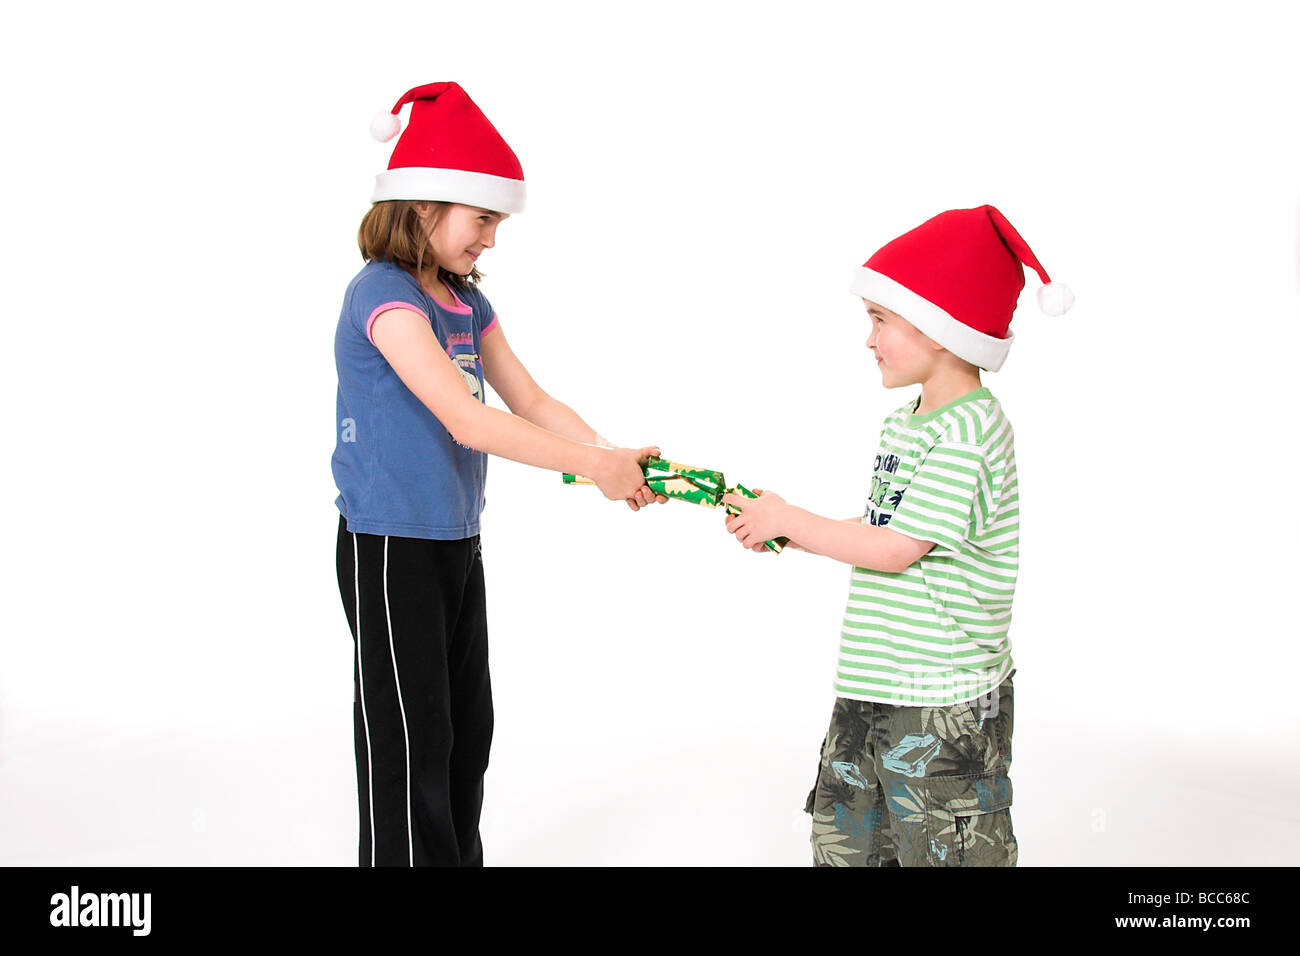 Young Children Pulling a Christmas Cracker Stock Photo